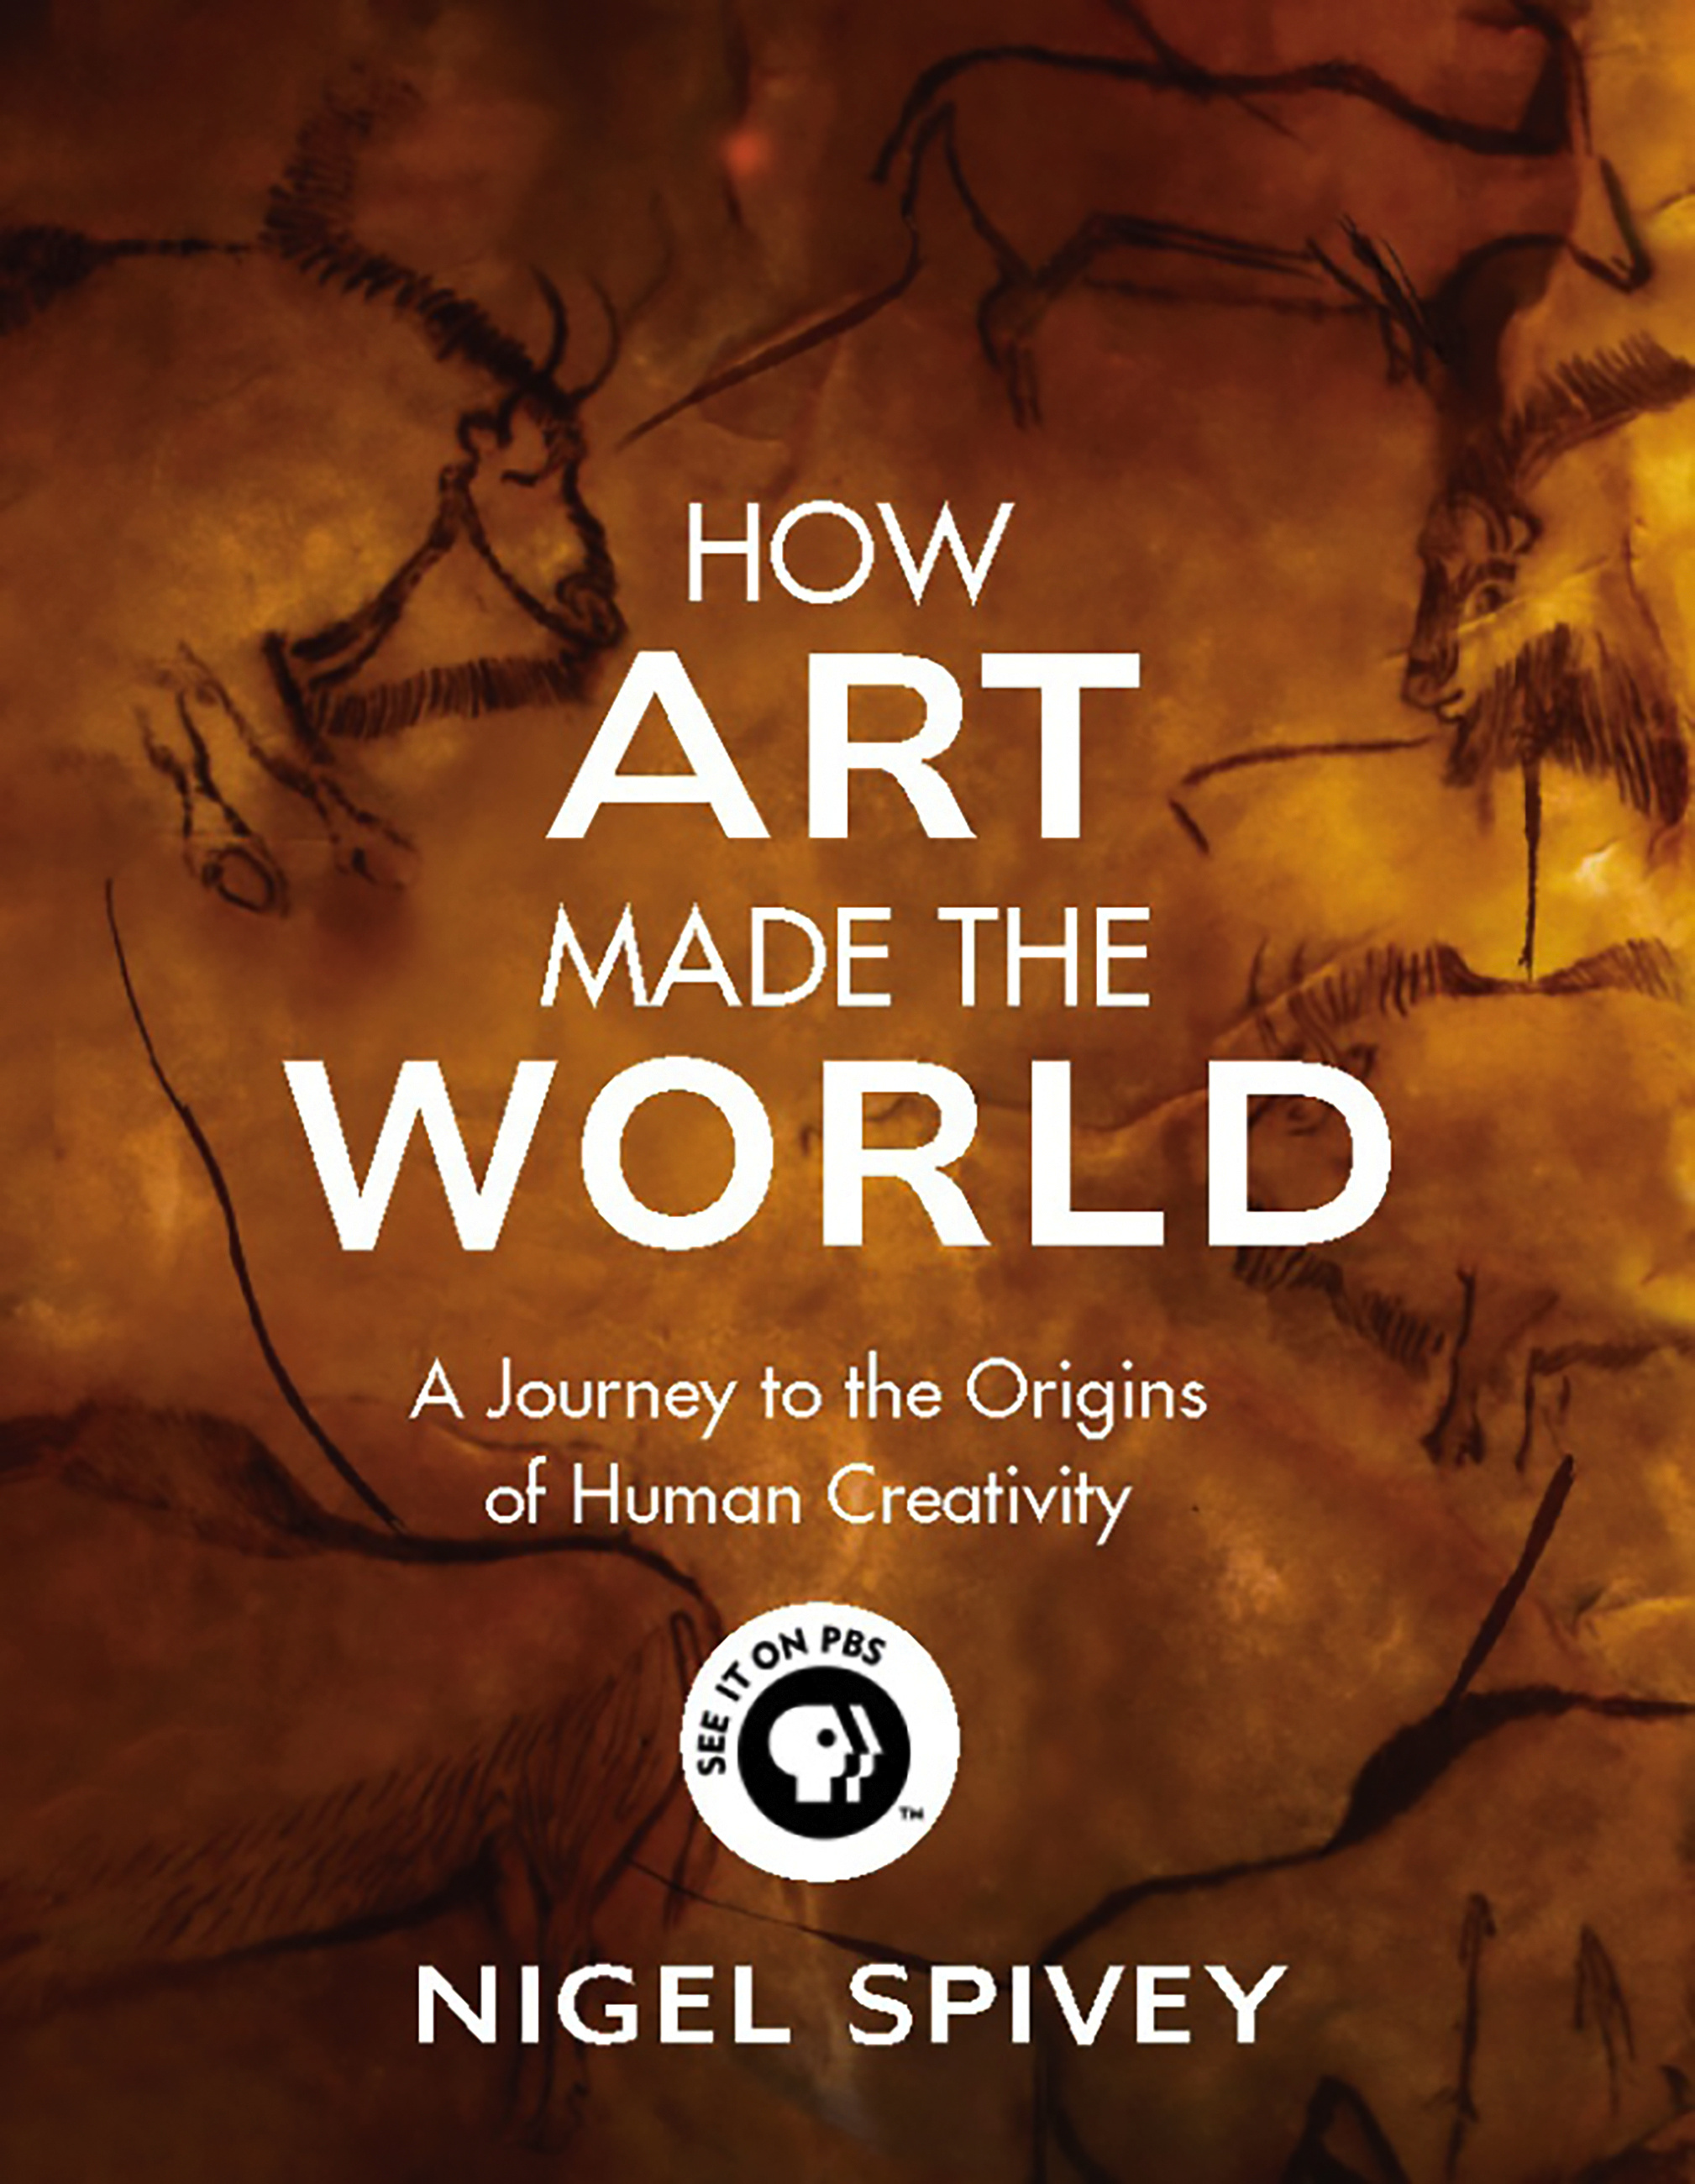 How Art Made the World by Nigel Spivey Hachette Book Group